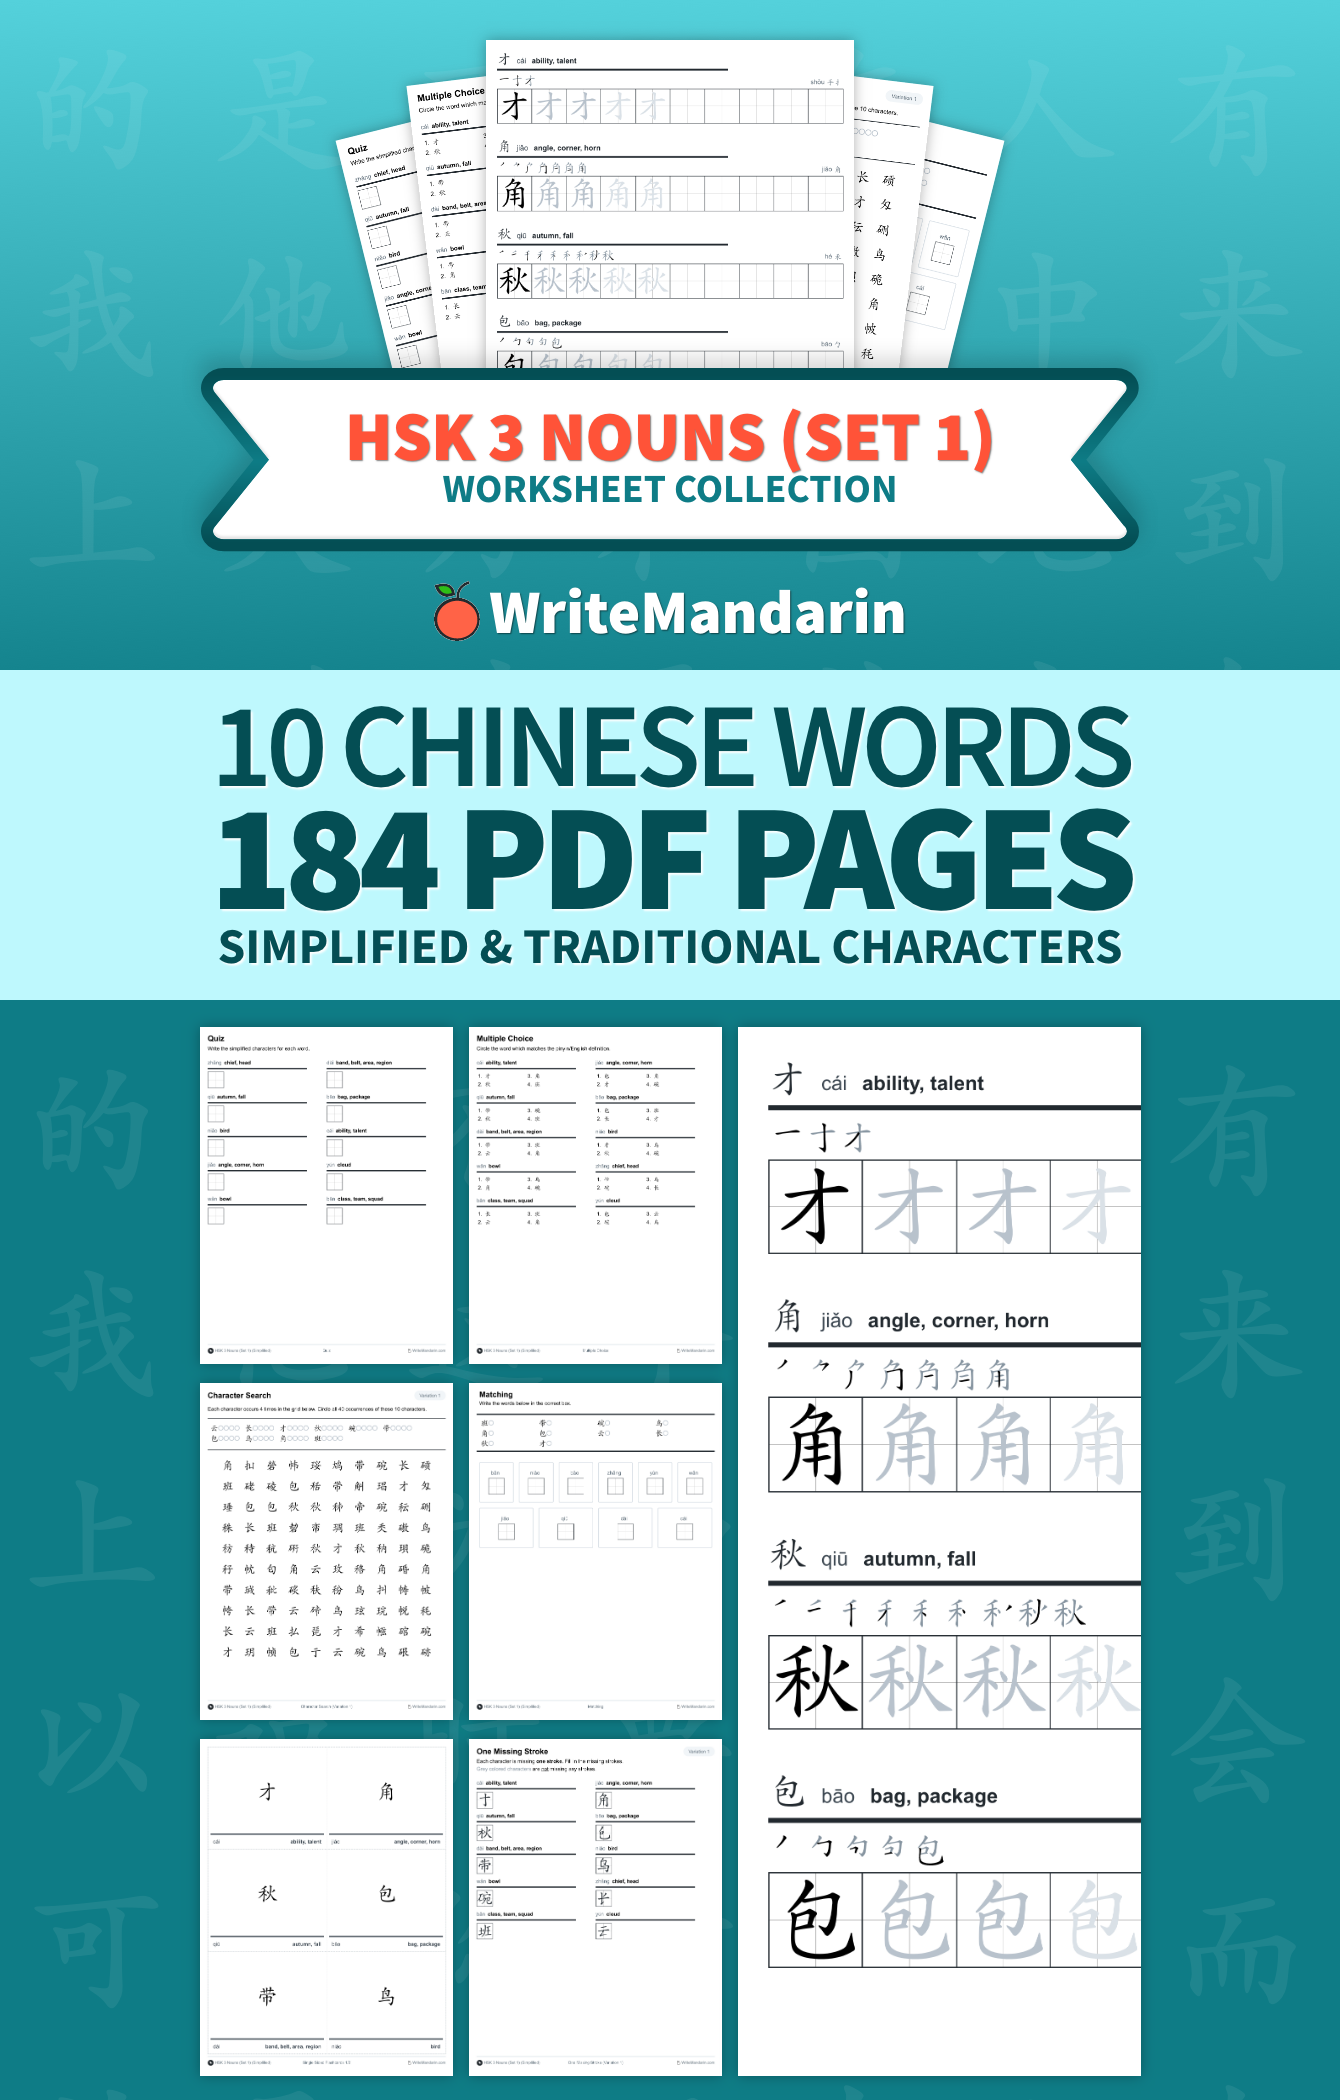 Preview image of HSK 3 Nouns (Set 1) worksheet collection